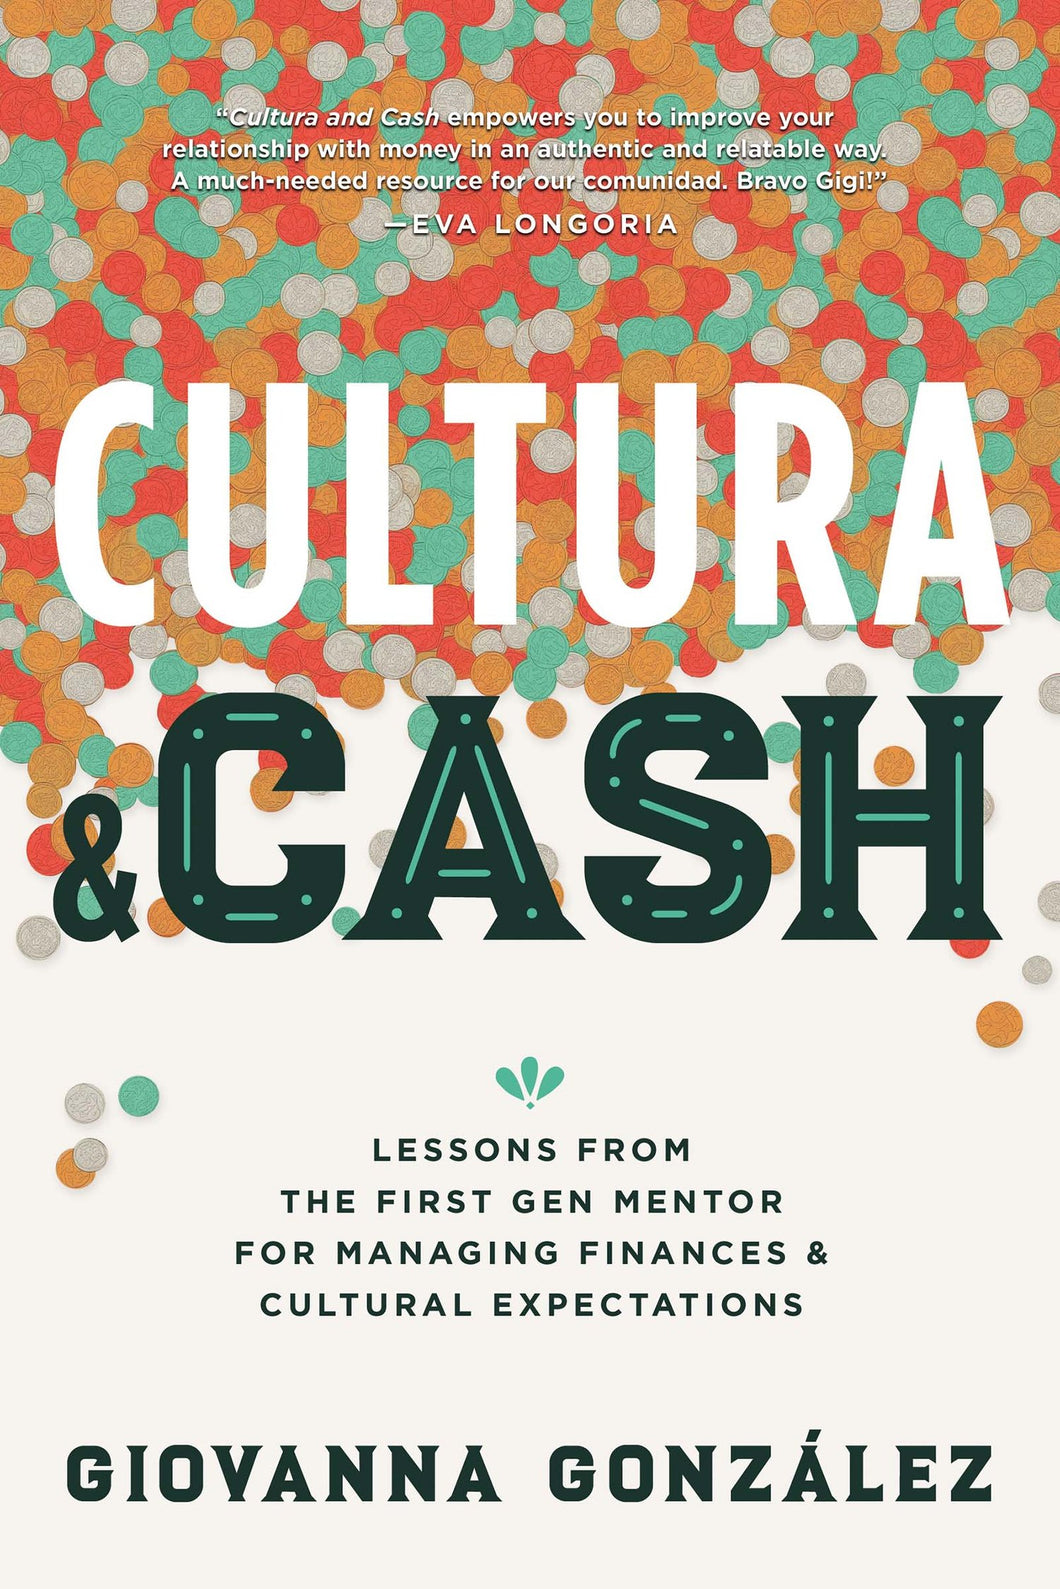 Cultura and Cash: Lessons from the First Gen Mentor for Managing Finances and Cultural Expectations (Copias Firmadas / Signed Copies)